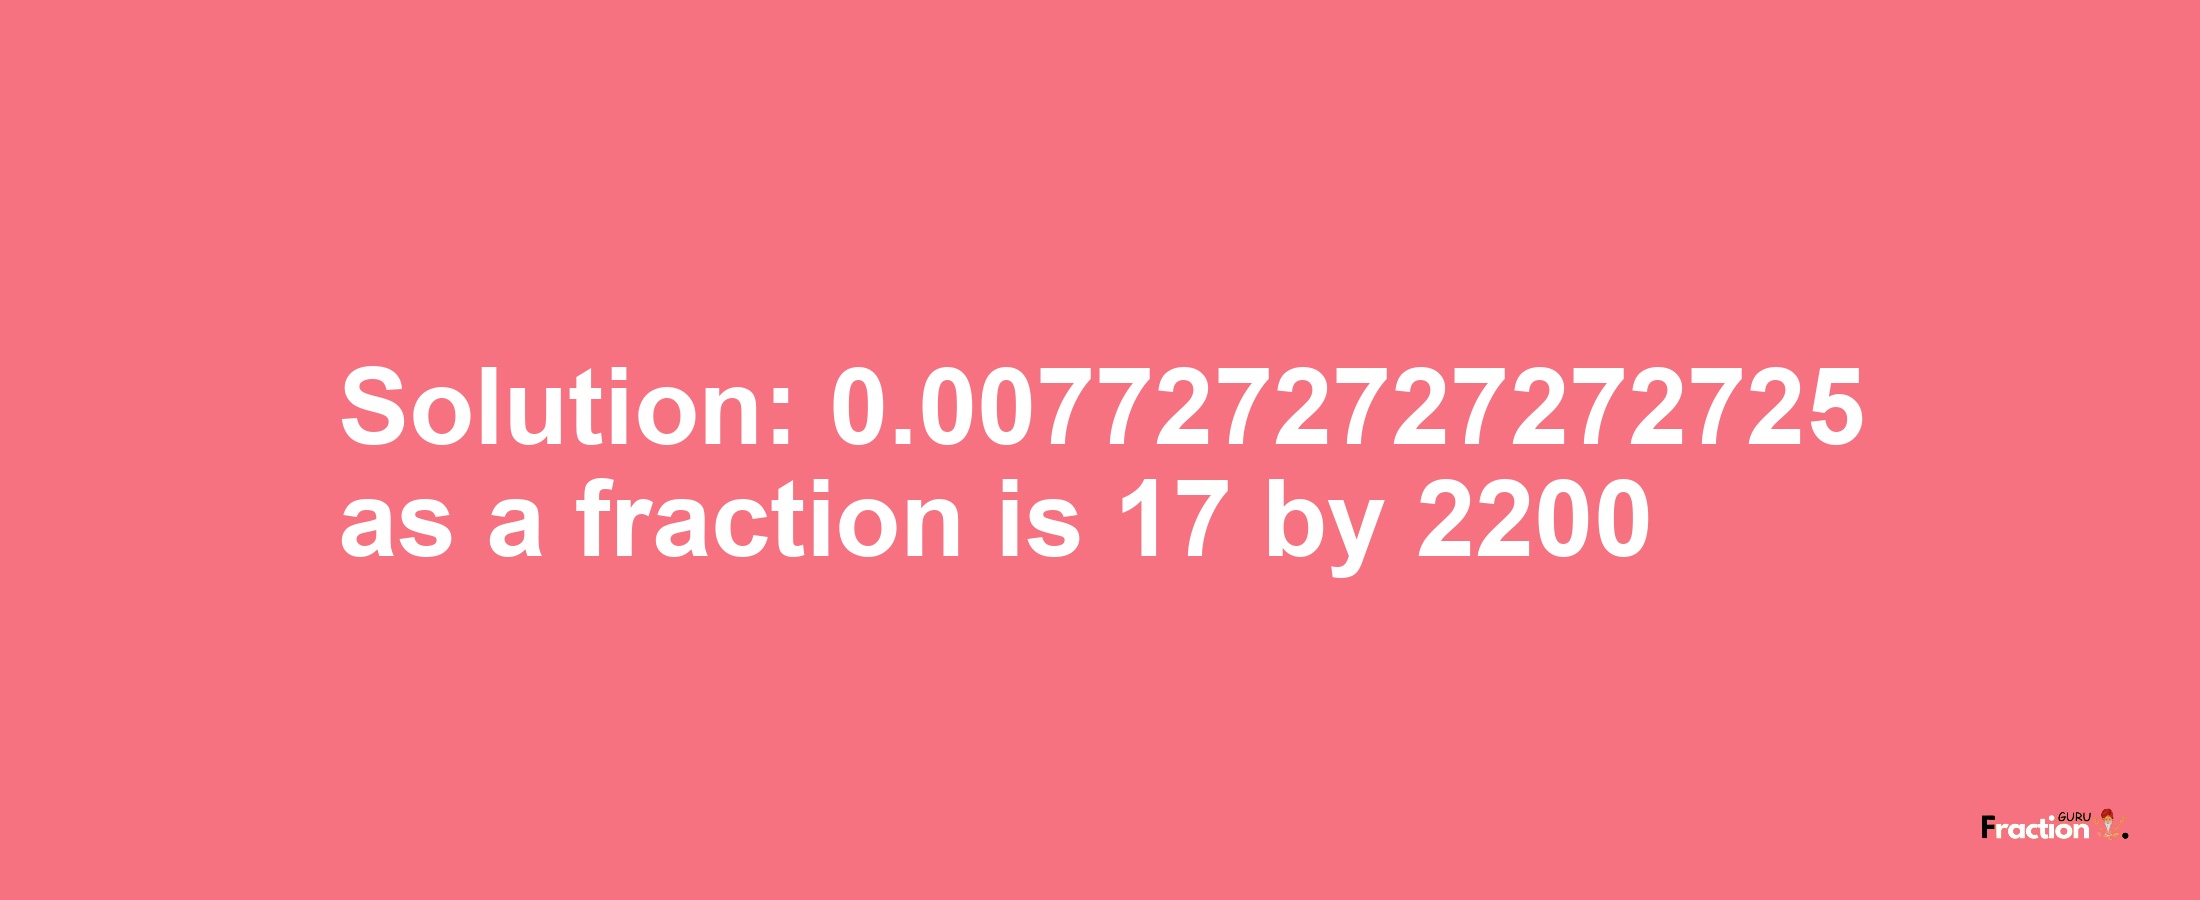 Solution:0.0077272727272725 as a fraction is 17/2200